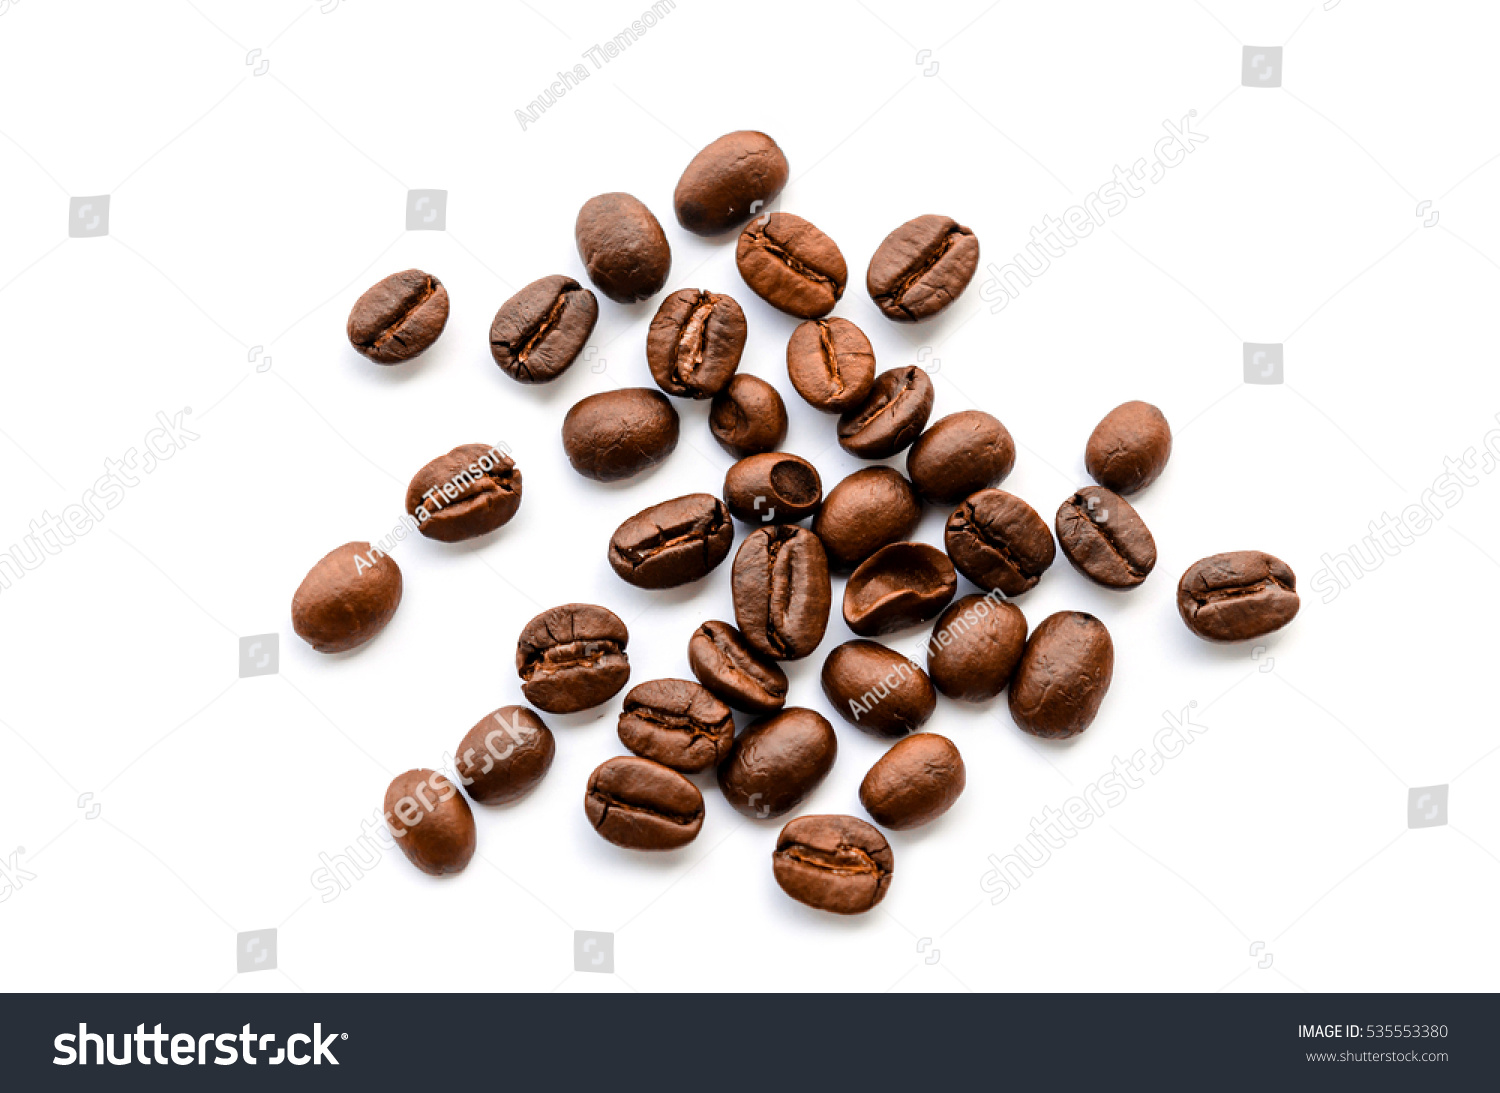 Coffee beans isolated on white background close up #535553380